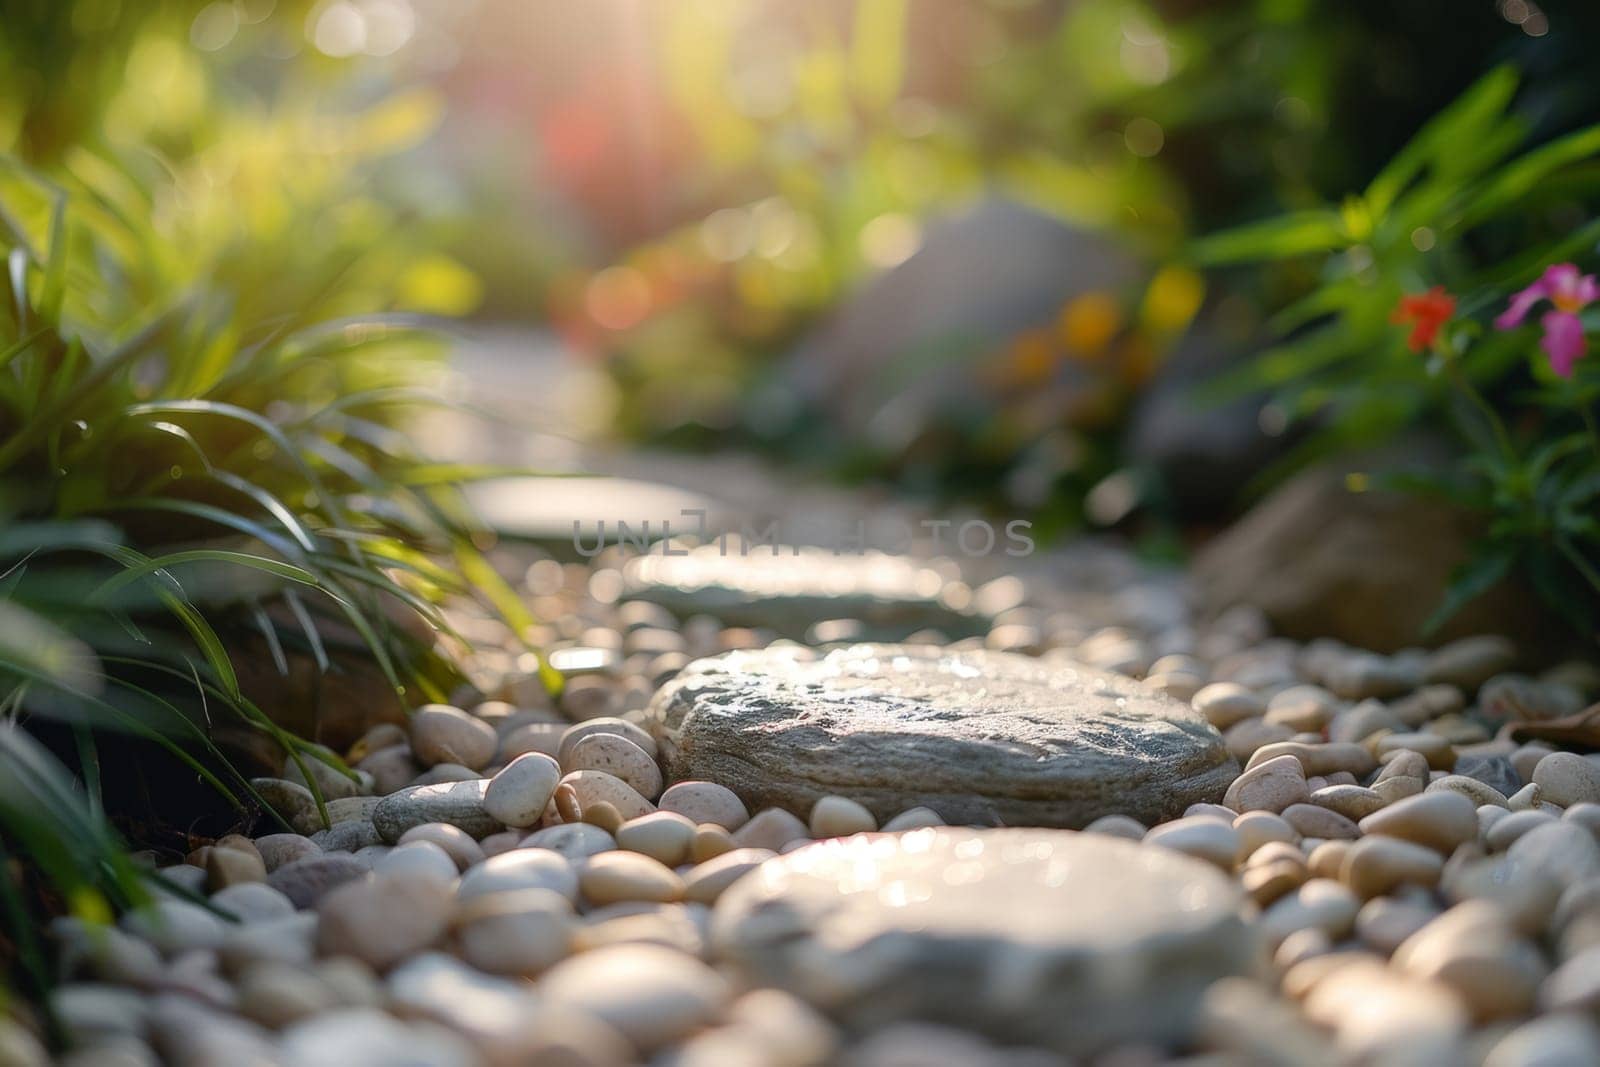 This image captures the tranquil essence of a serene garden, with a stone pathway leading through lush greenery and vibrant flowers, ideal for mindfulness themes.